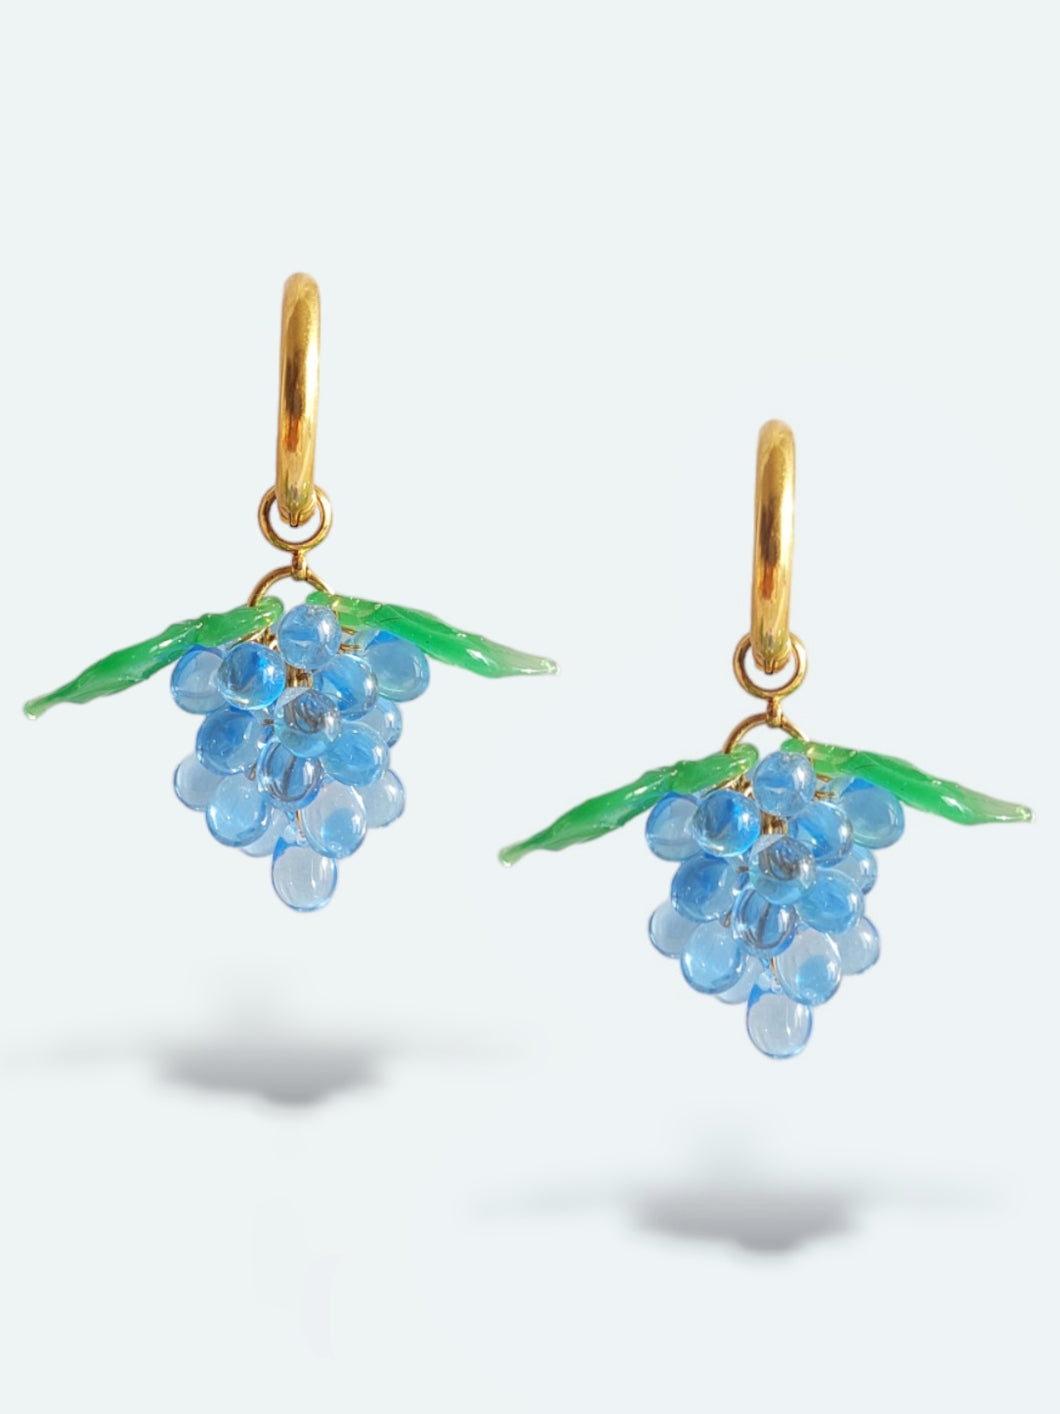 Blue Grape earrings. Handmade with Glass beads and gold plated stainless steel.